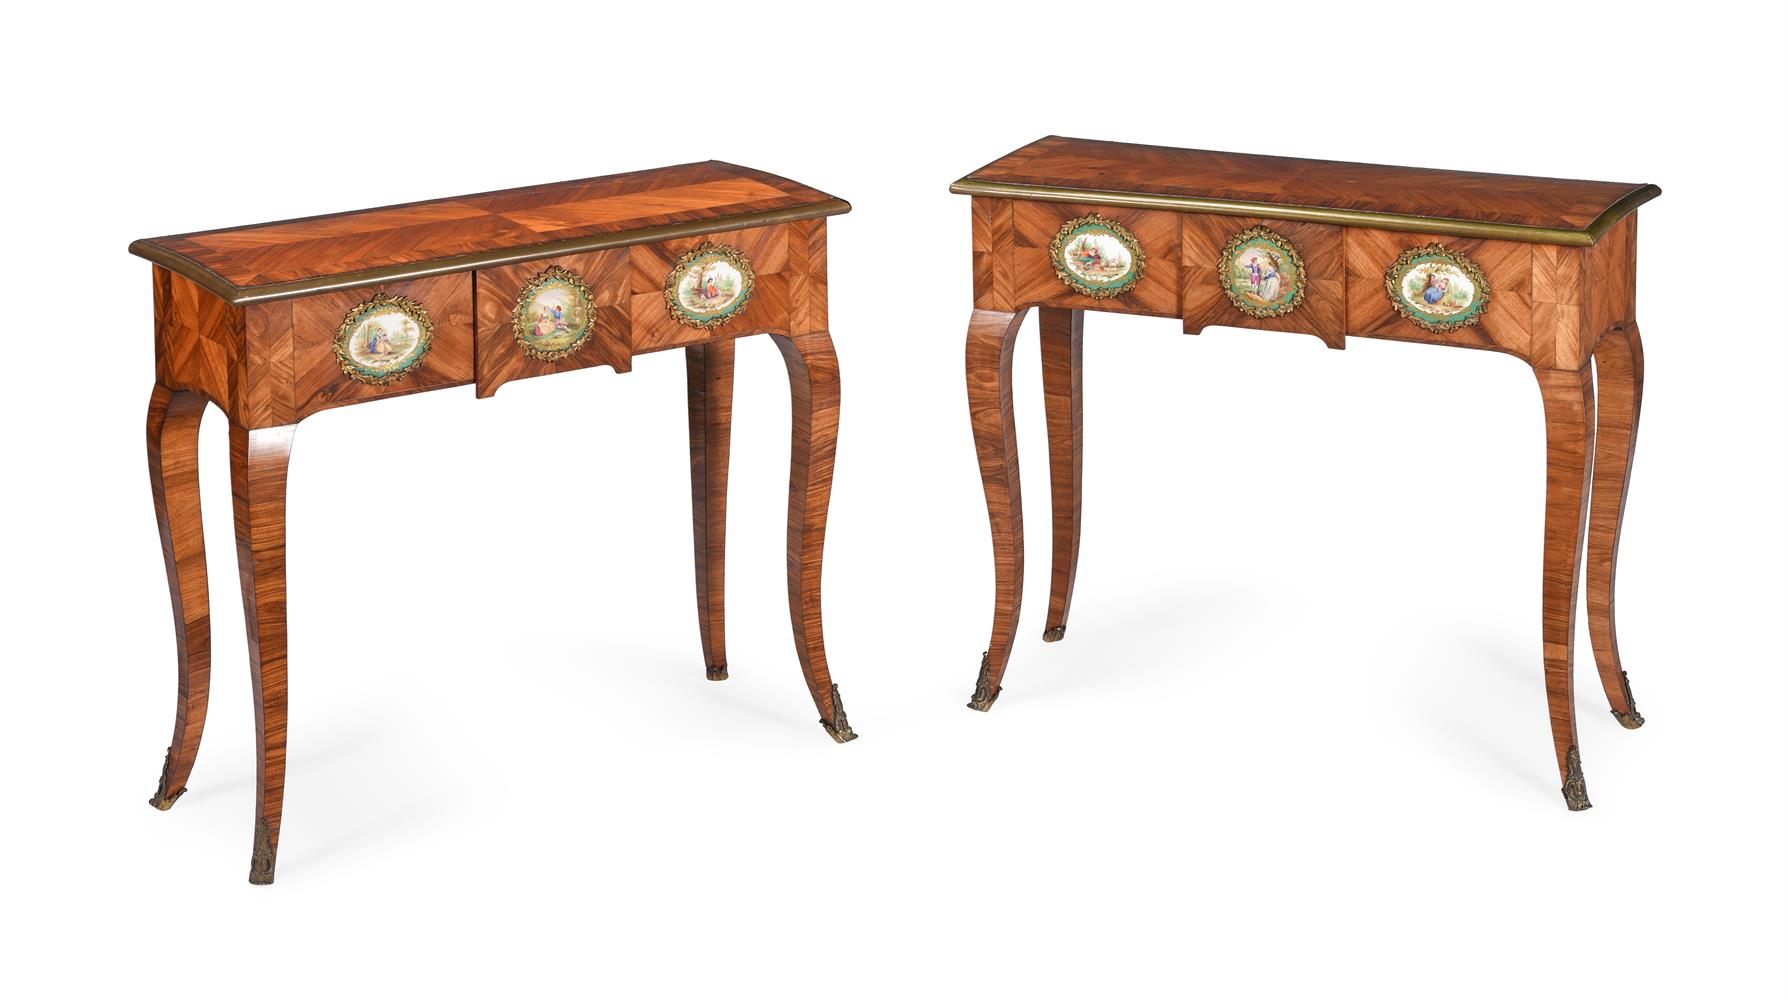 Y A PAIR OF FRENCH TULIPWOOD, GILT METAL AND PORCELAIN MOUNTED SIDE OR CONSOLE TABLES - Image 2 of 7